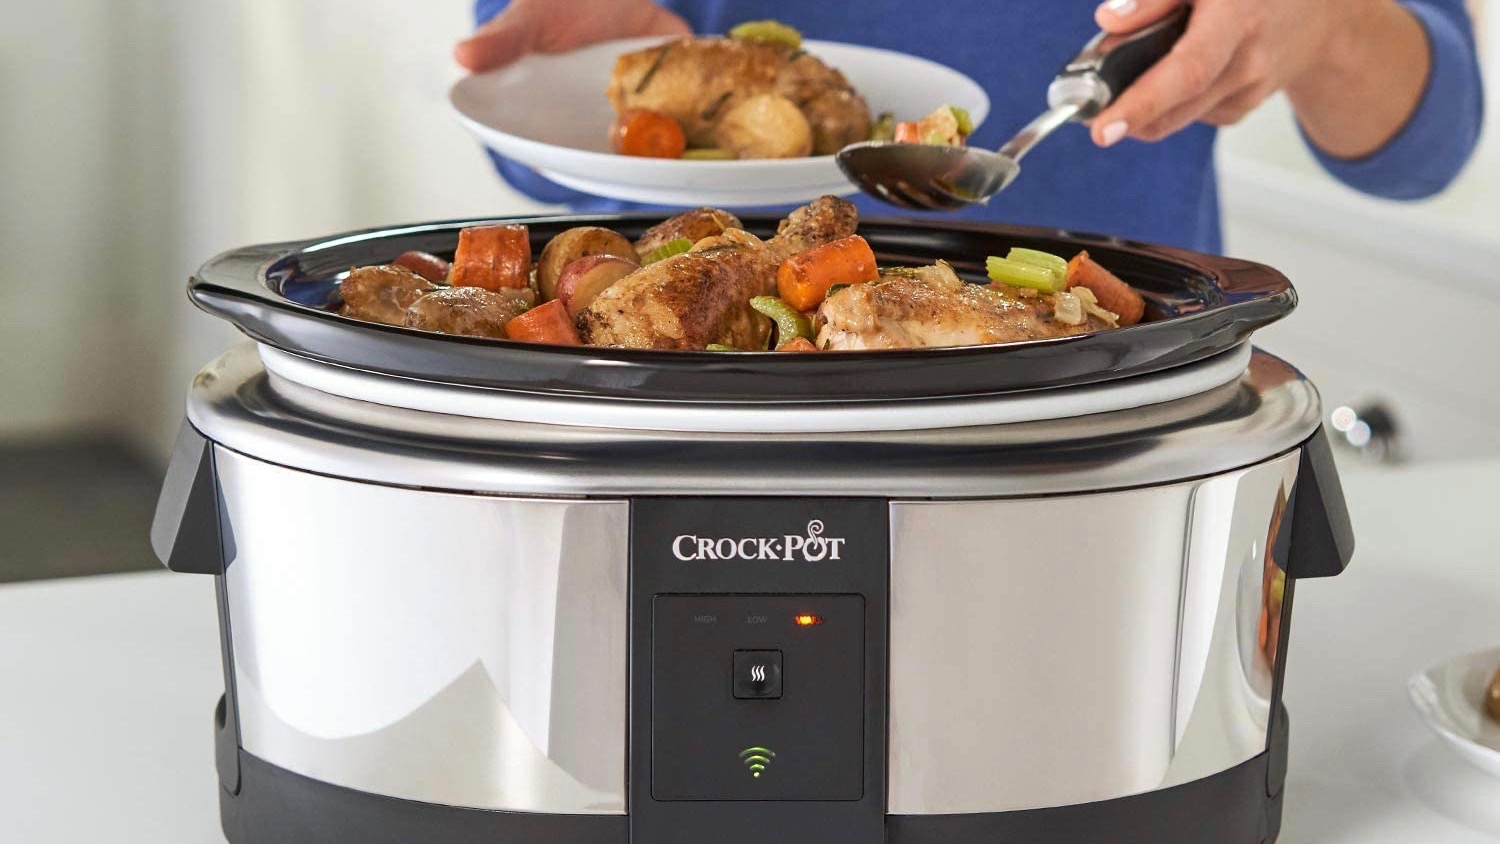 Crock-Pot 6-Quart Stainless Steel Oval Slow Cooker in the Slow Cookers  department at